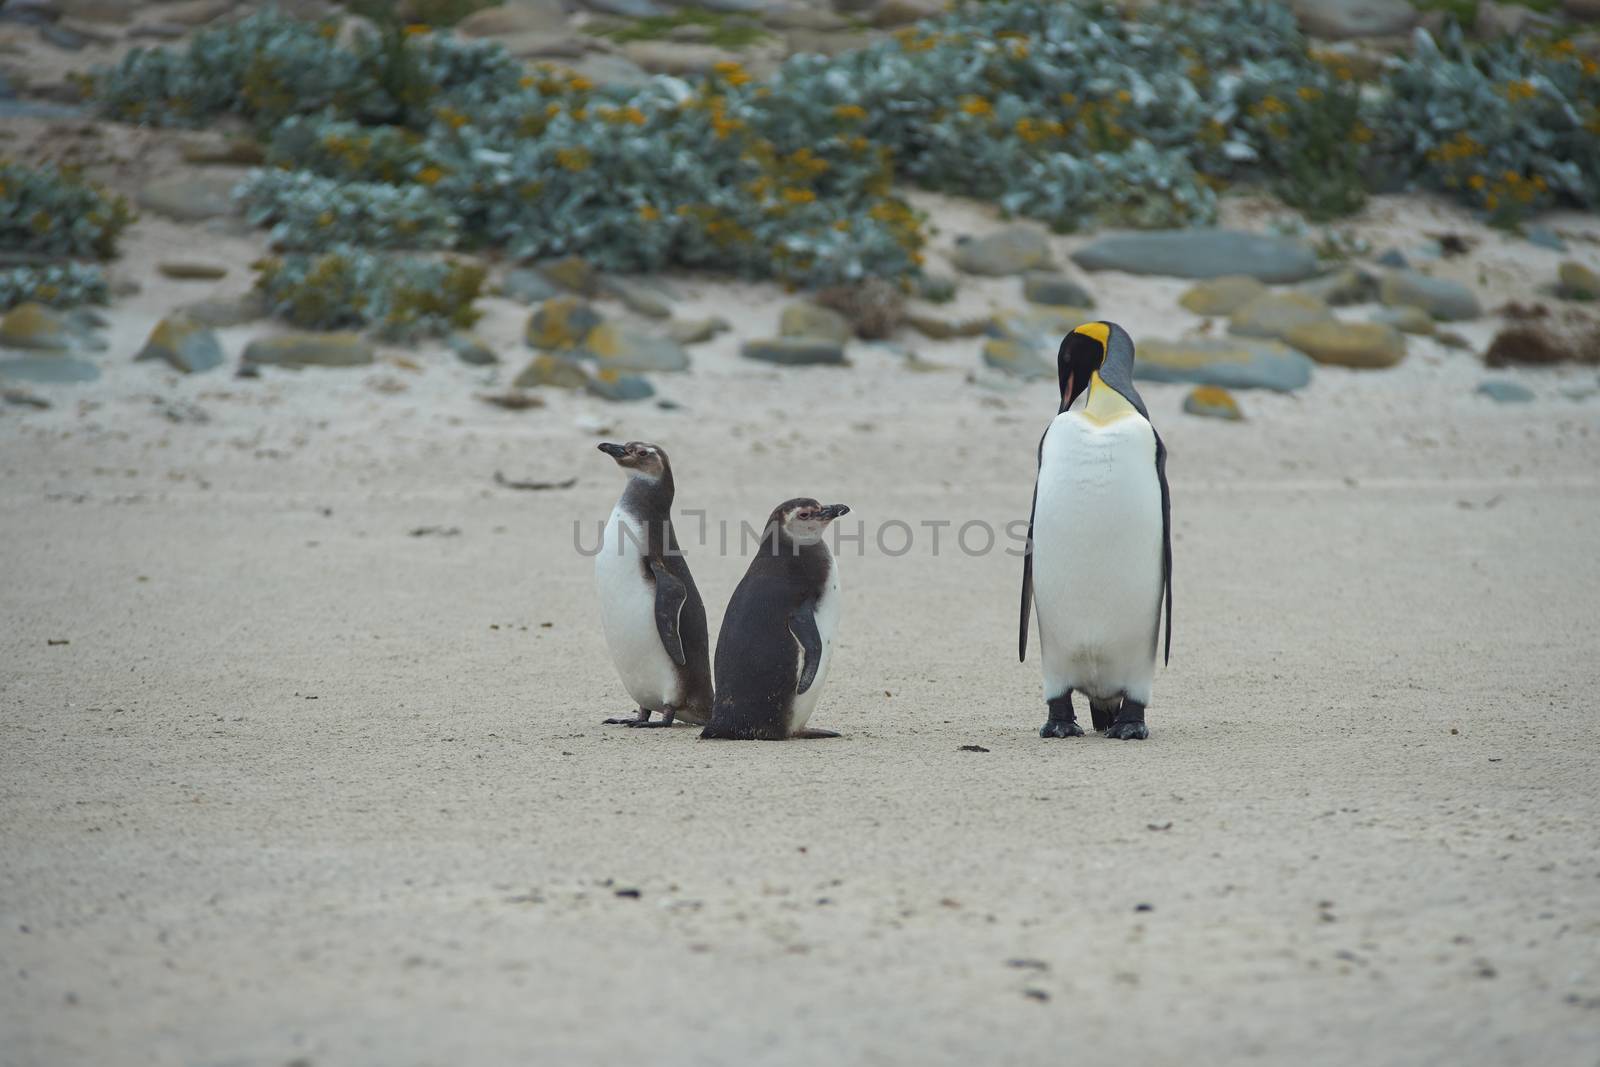 Juvenile Magellanic Penguins (Spheniscus magellanicus) watch as an adult King Penguin (Aptenodytes patagonicus) grooms its magnificent plumage on a large sandy beach on Bleaker Island in the Falkland Islands.